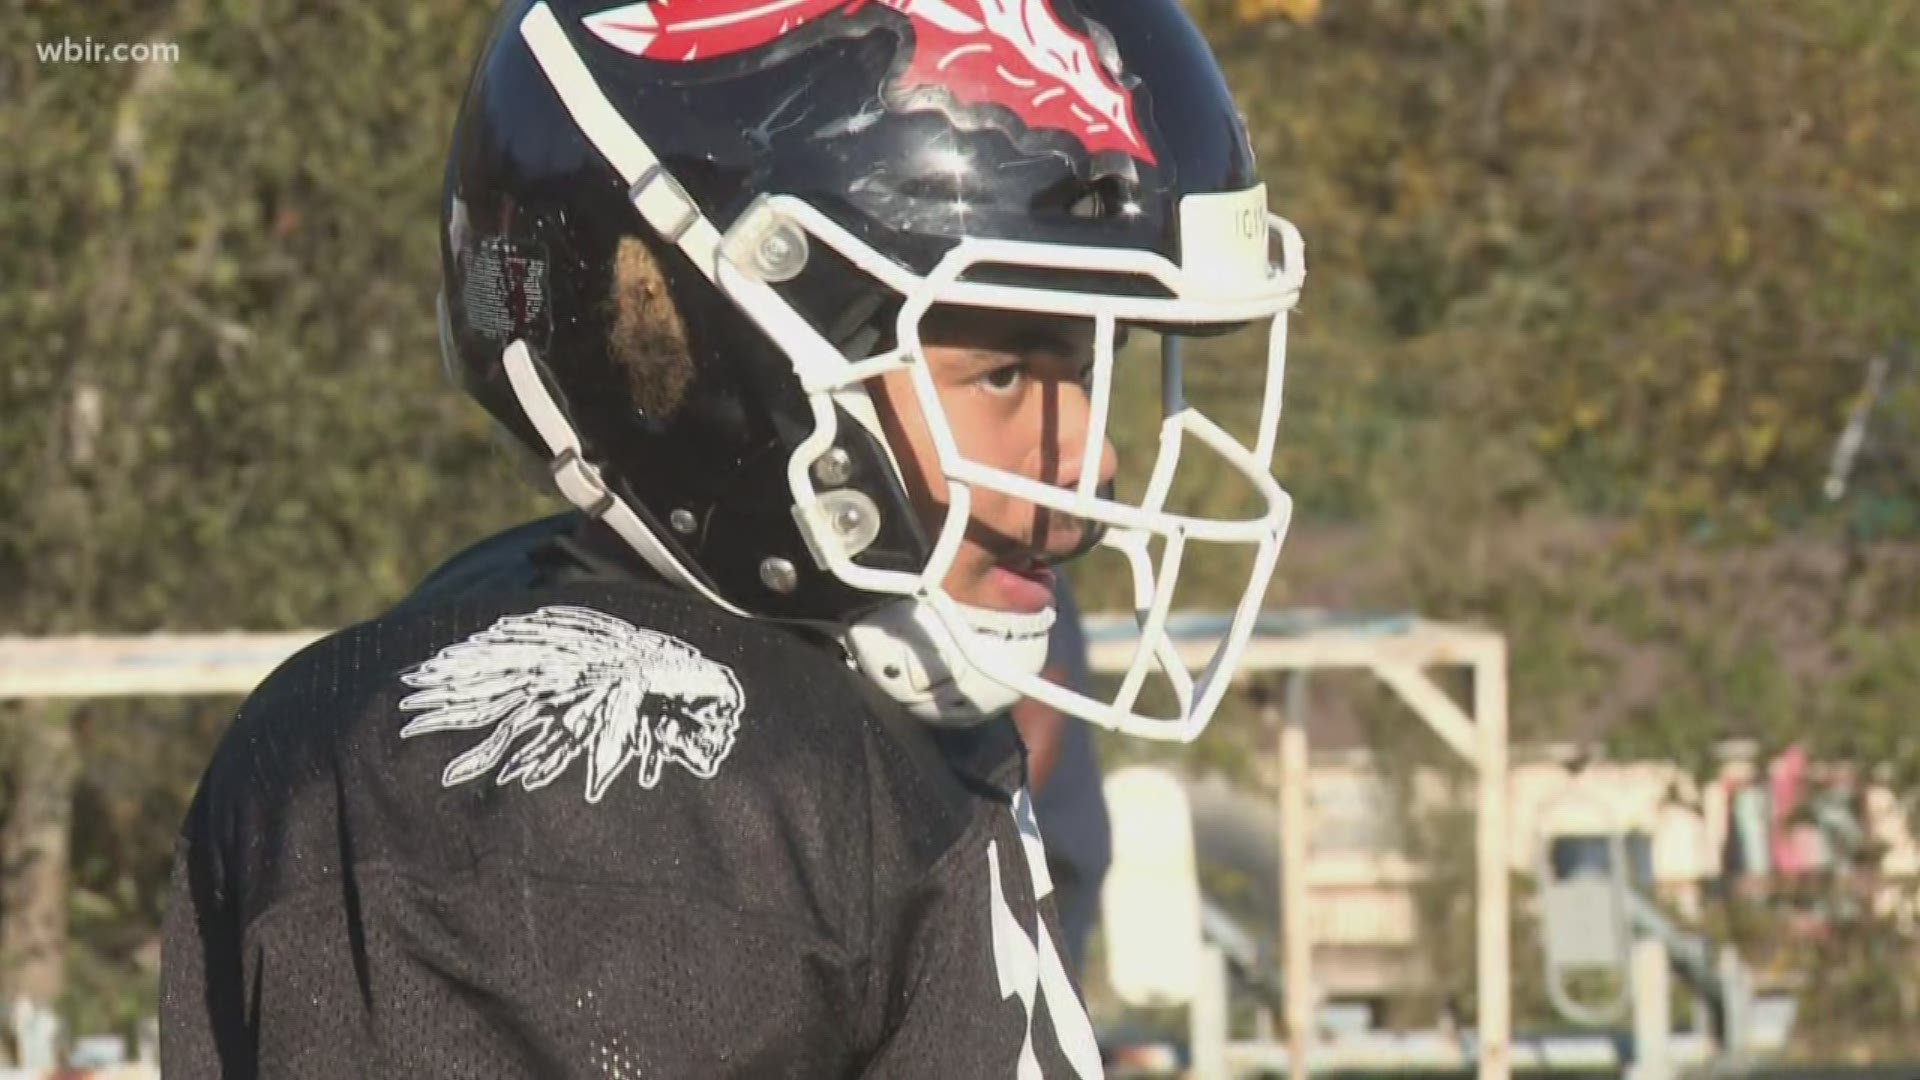 South-Doyle's Noah Myers is our 2019 Week 9 Defensive Player of the Week!